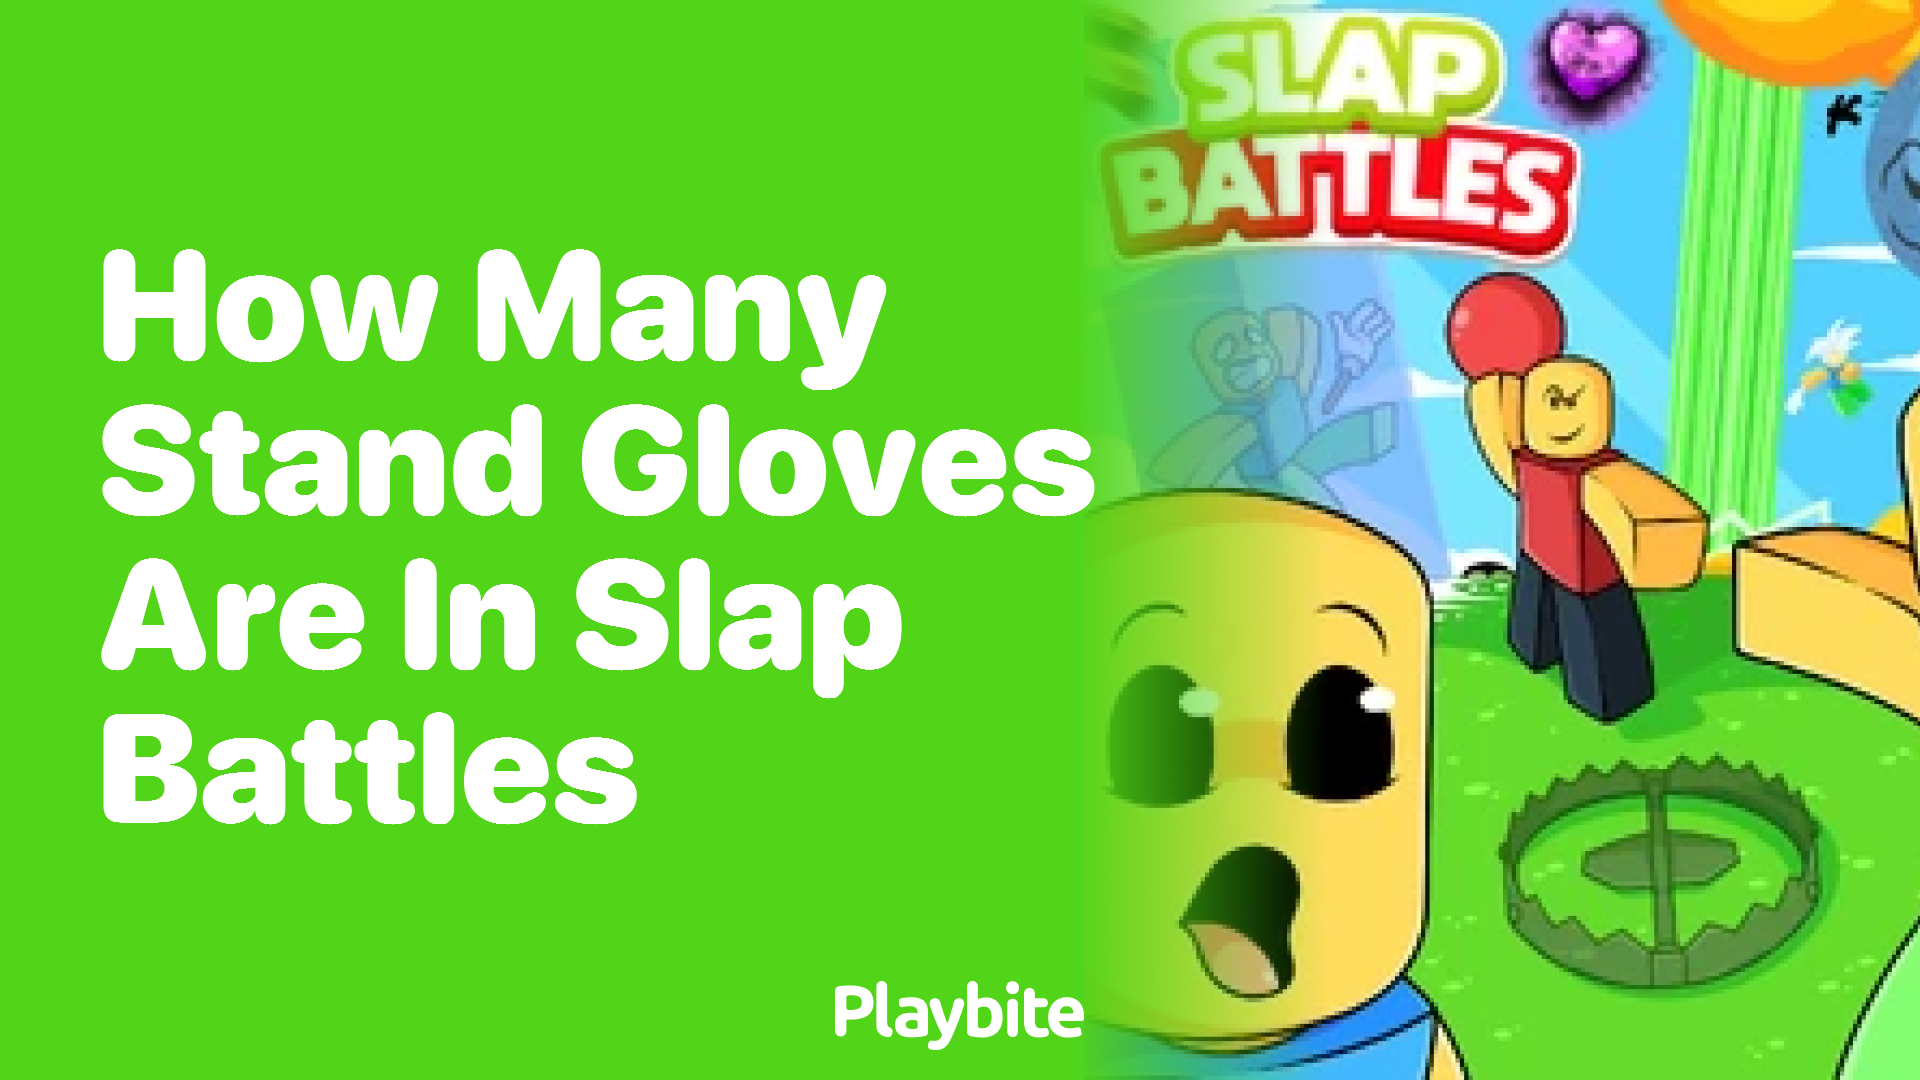 How Many Stand Gloves Are in Slap Battles?